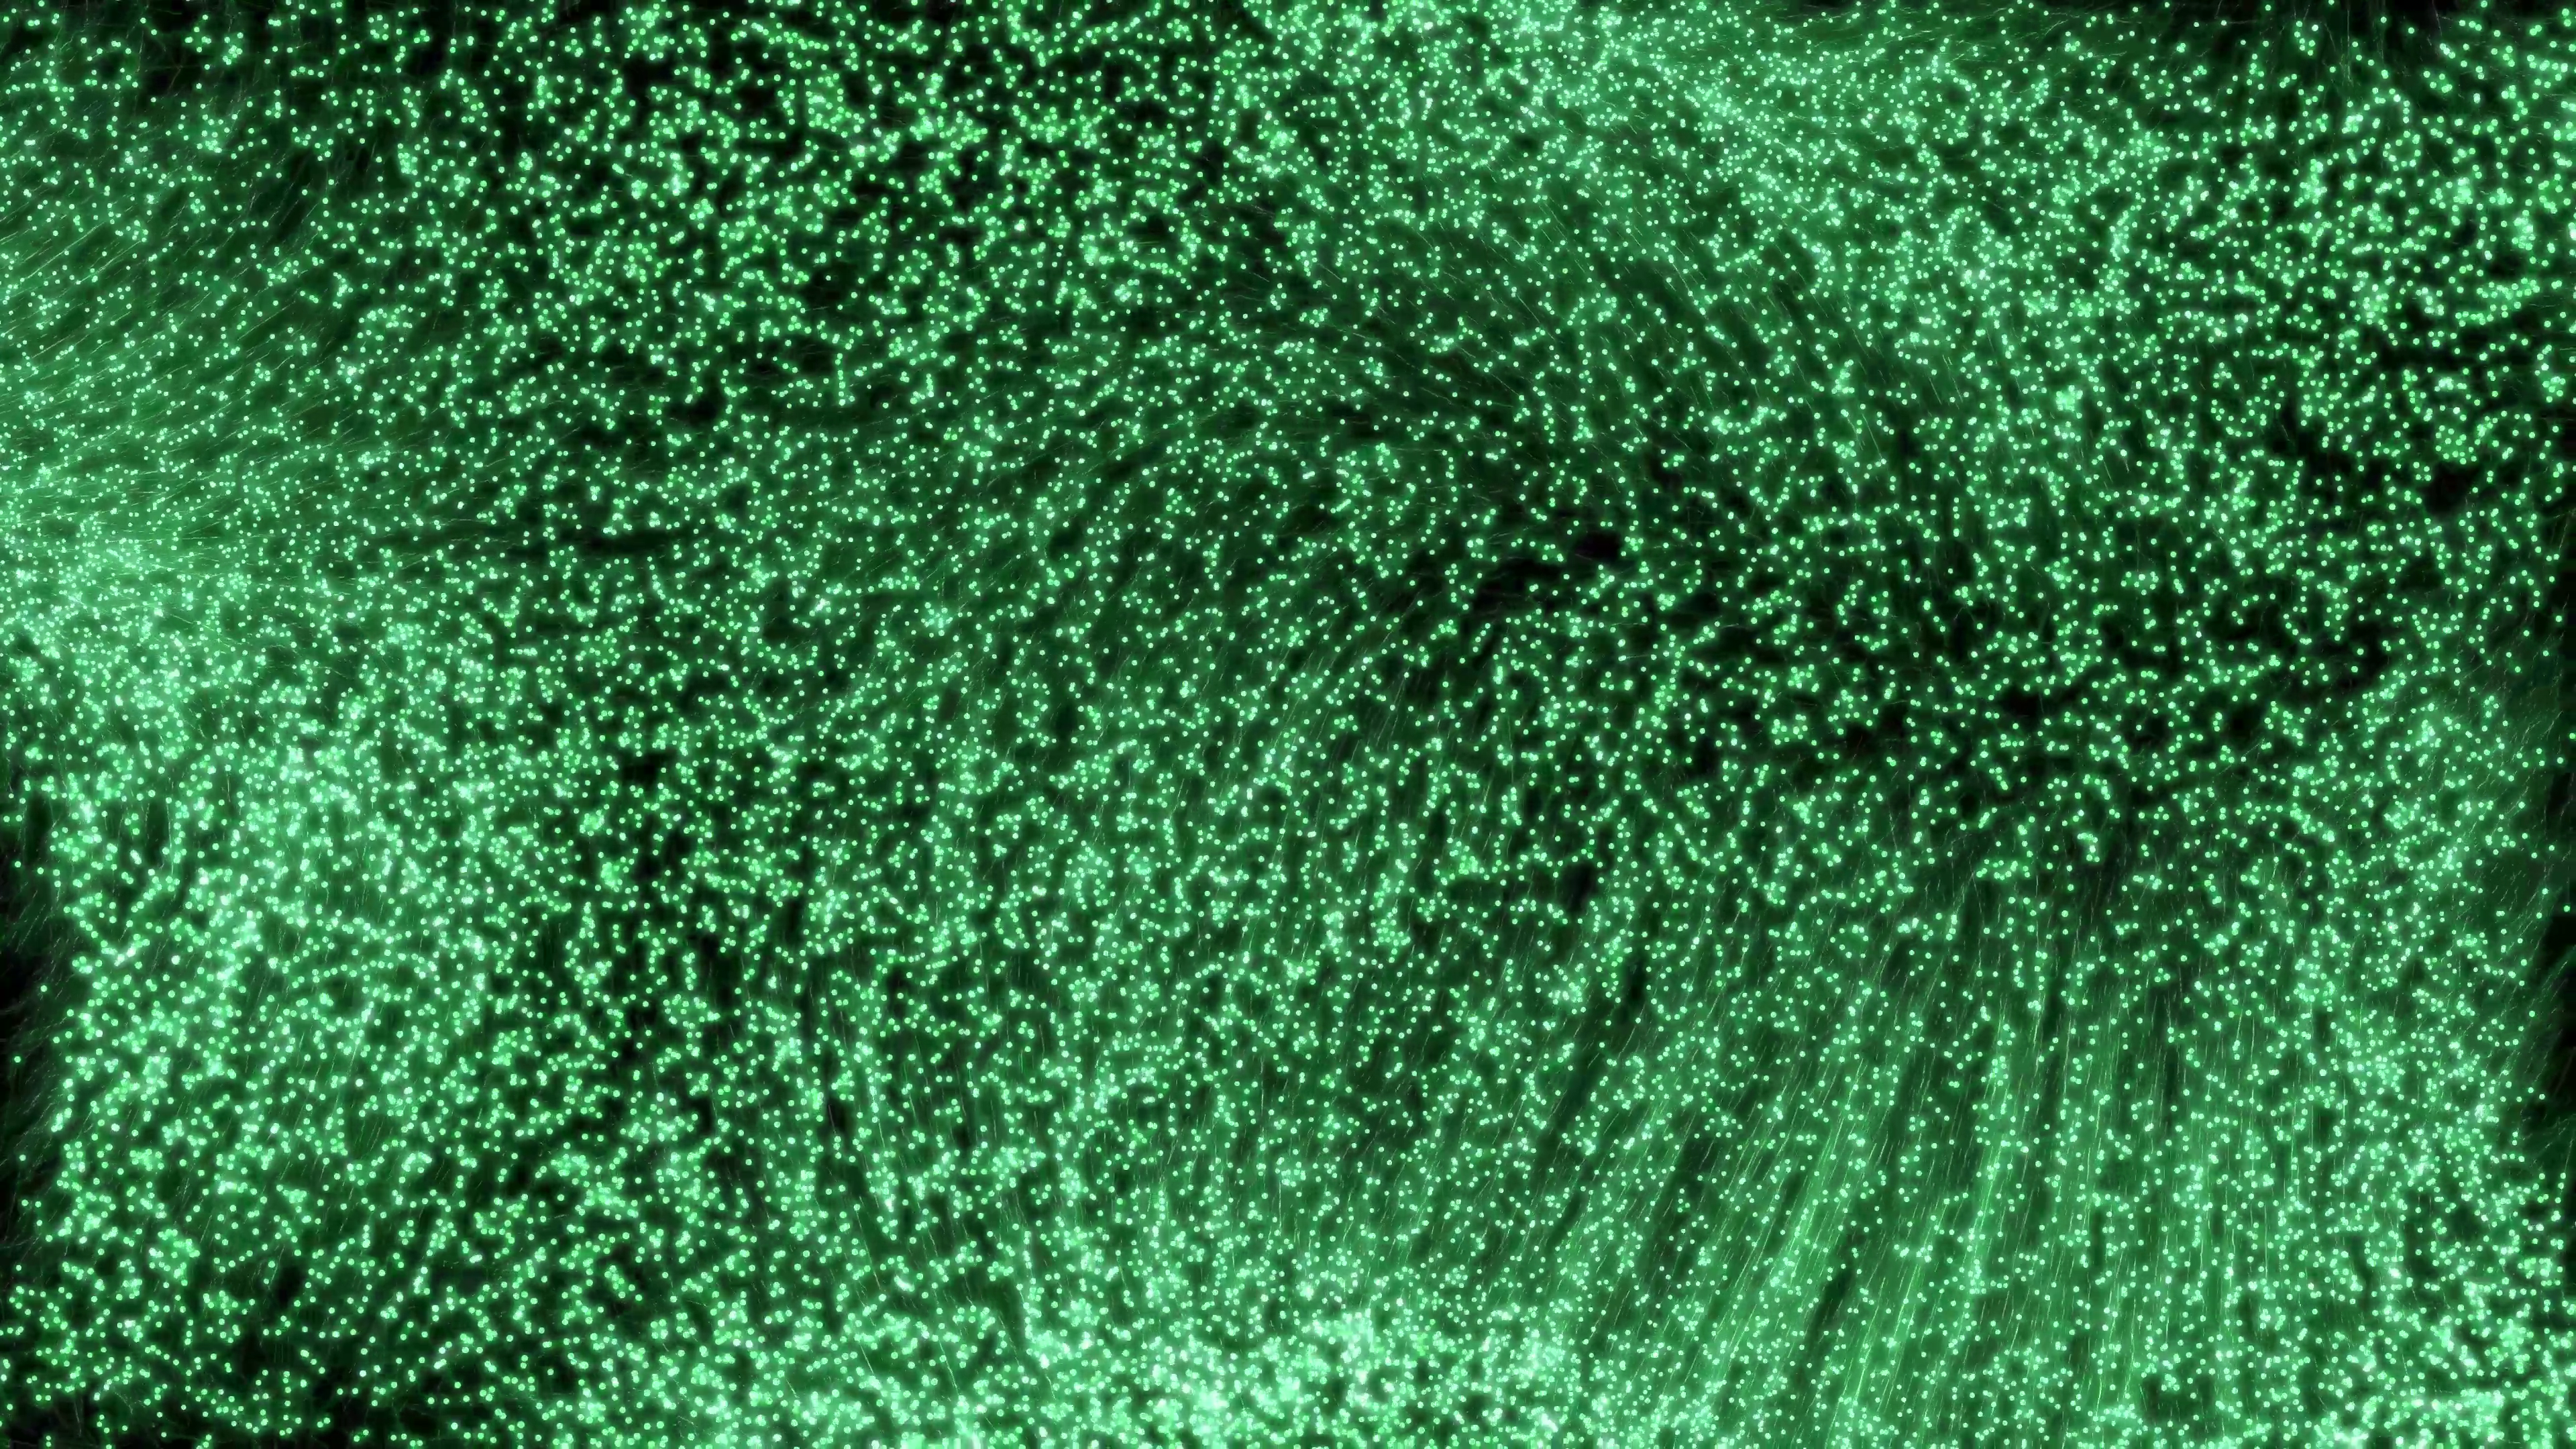 4K Glowing Green Particles Motion Background || VFX Free To Use 4K Screensaver || Free Download